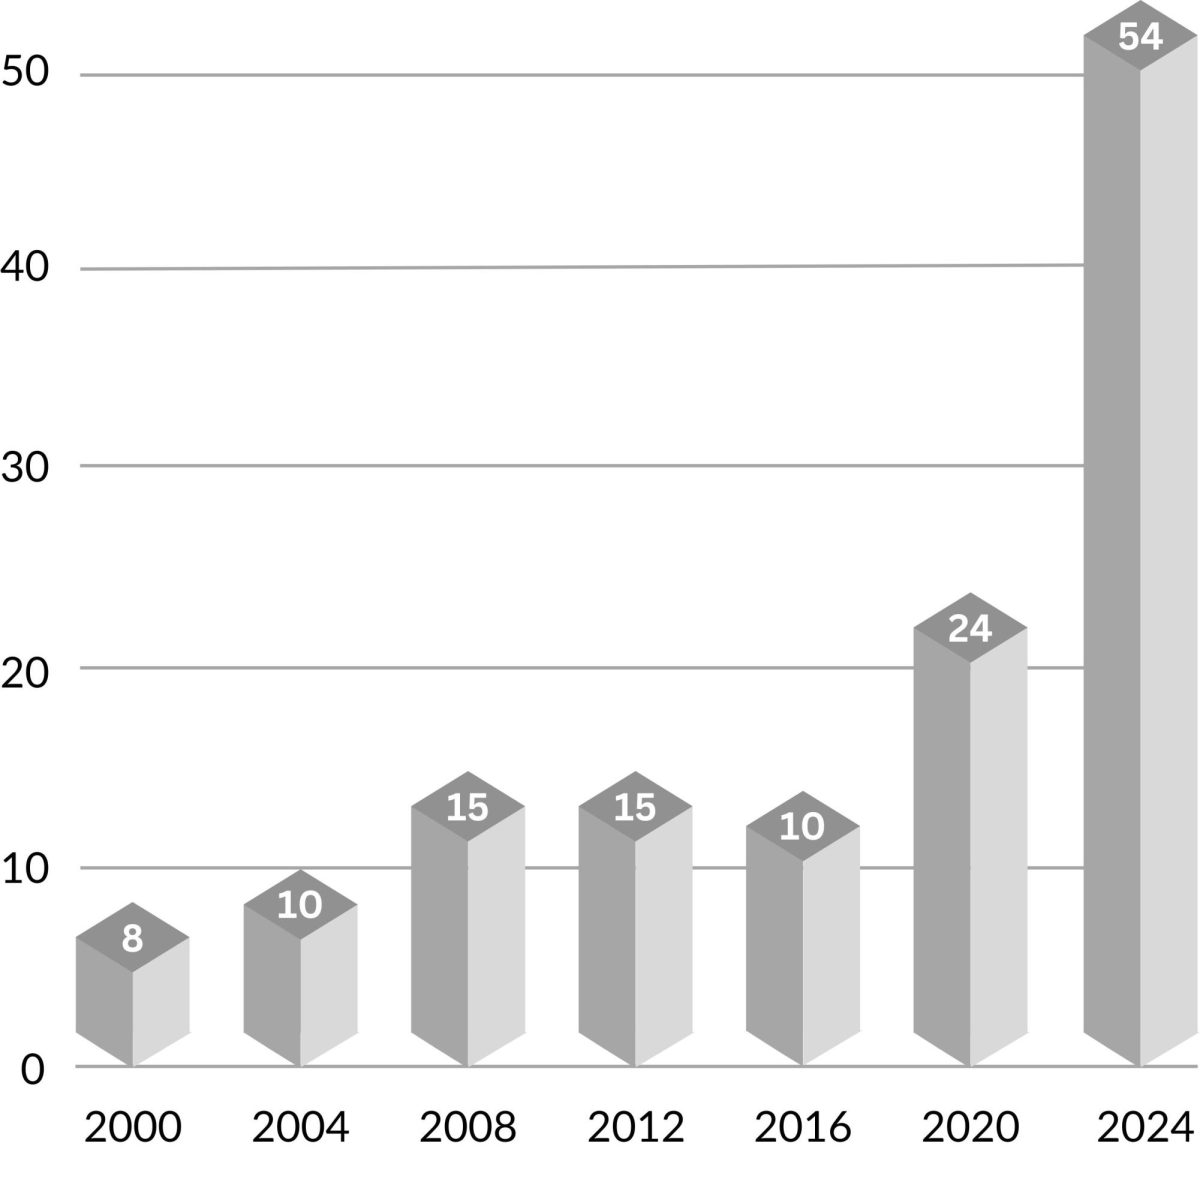 CLUB CHAOS. While clubs stayed in the 10-15 range for over a decade, 2020 brought a substantial jump that cannot be accounted for, even with the addition of affinity groups beginning in 2012. Clubs more than doubled between 2020-2024, a time during which the application process for clubs changed.
Source: Ibid Yearbook archives